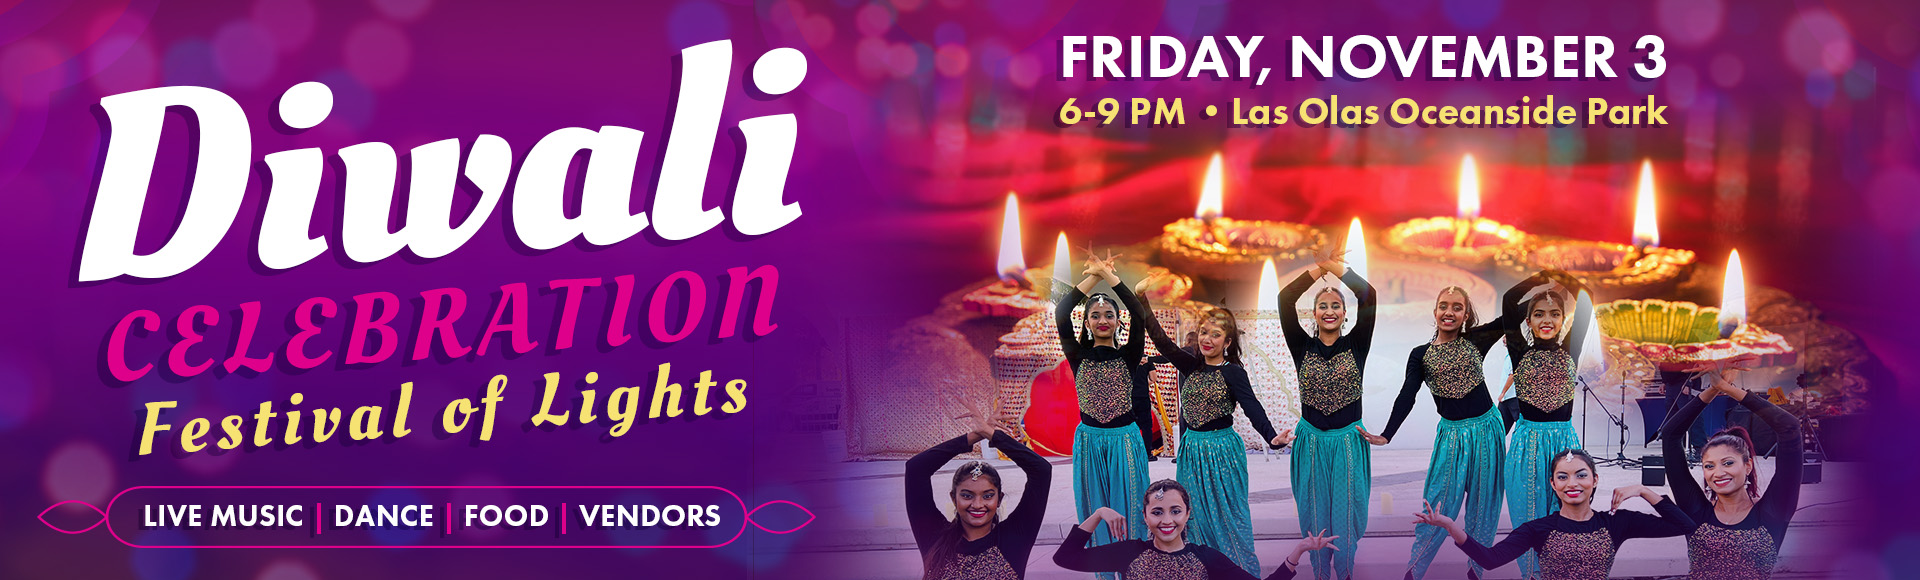 Diwali Celebration. Festival of Lights. Picture of three burning candles. Live music, dance, food, vendors. Friday, October 21, 6 to 9 PM. Las Olas Oceanside Park